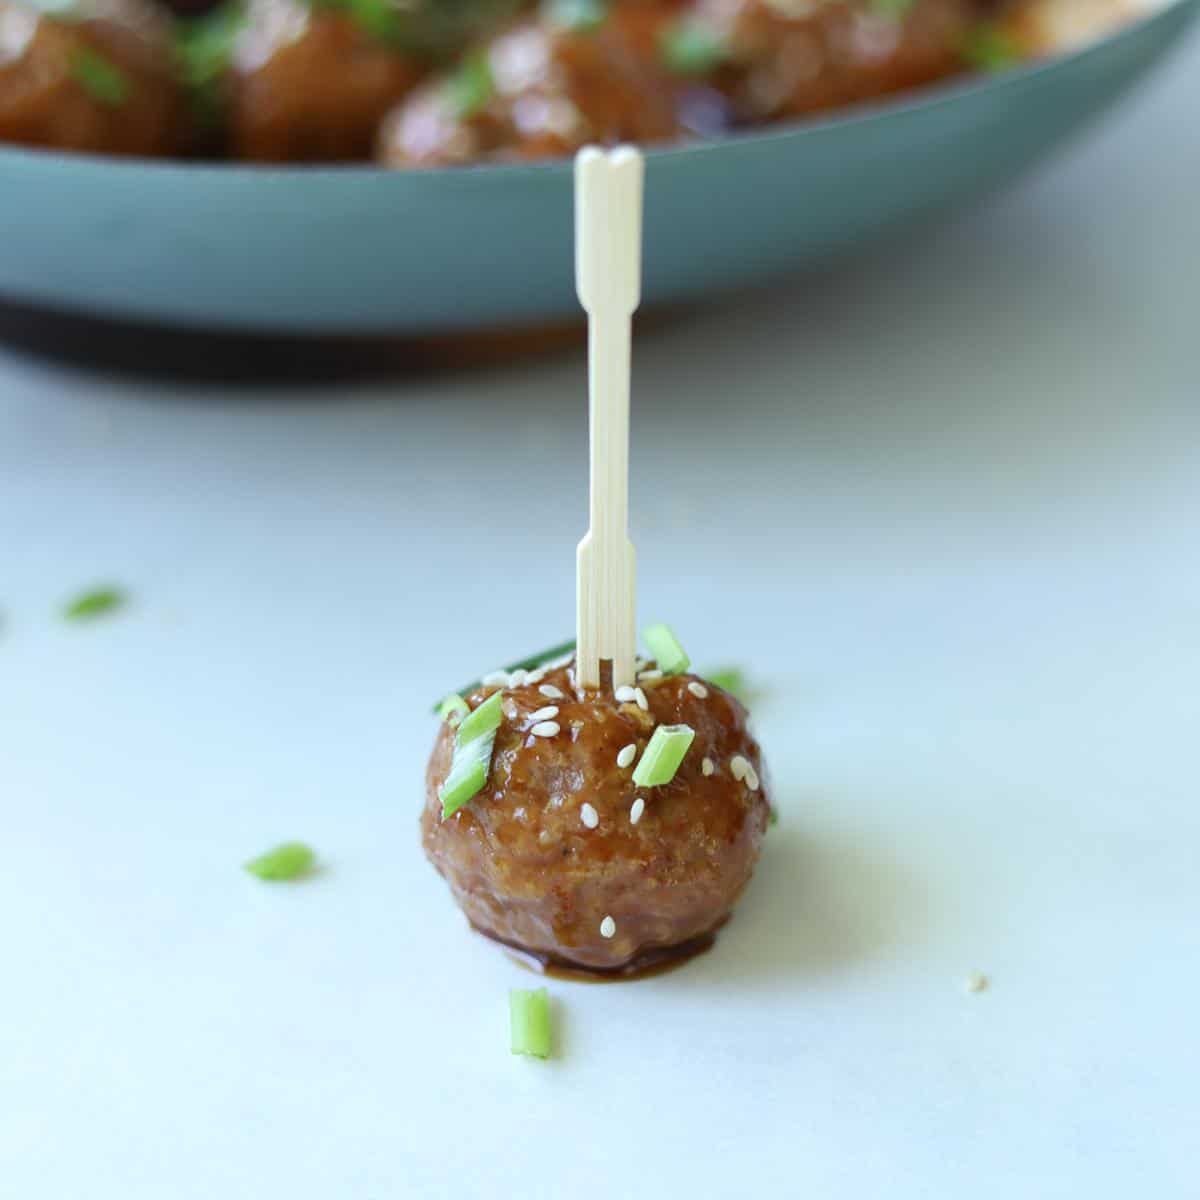 meatball with a toothpick stuck into it